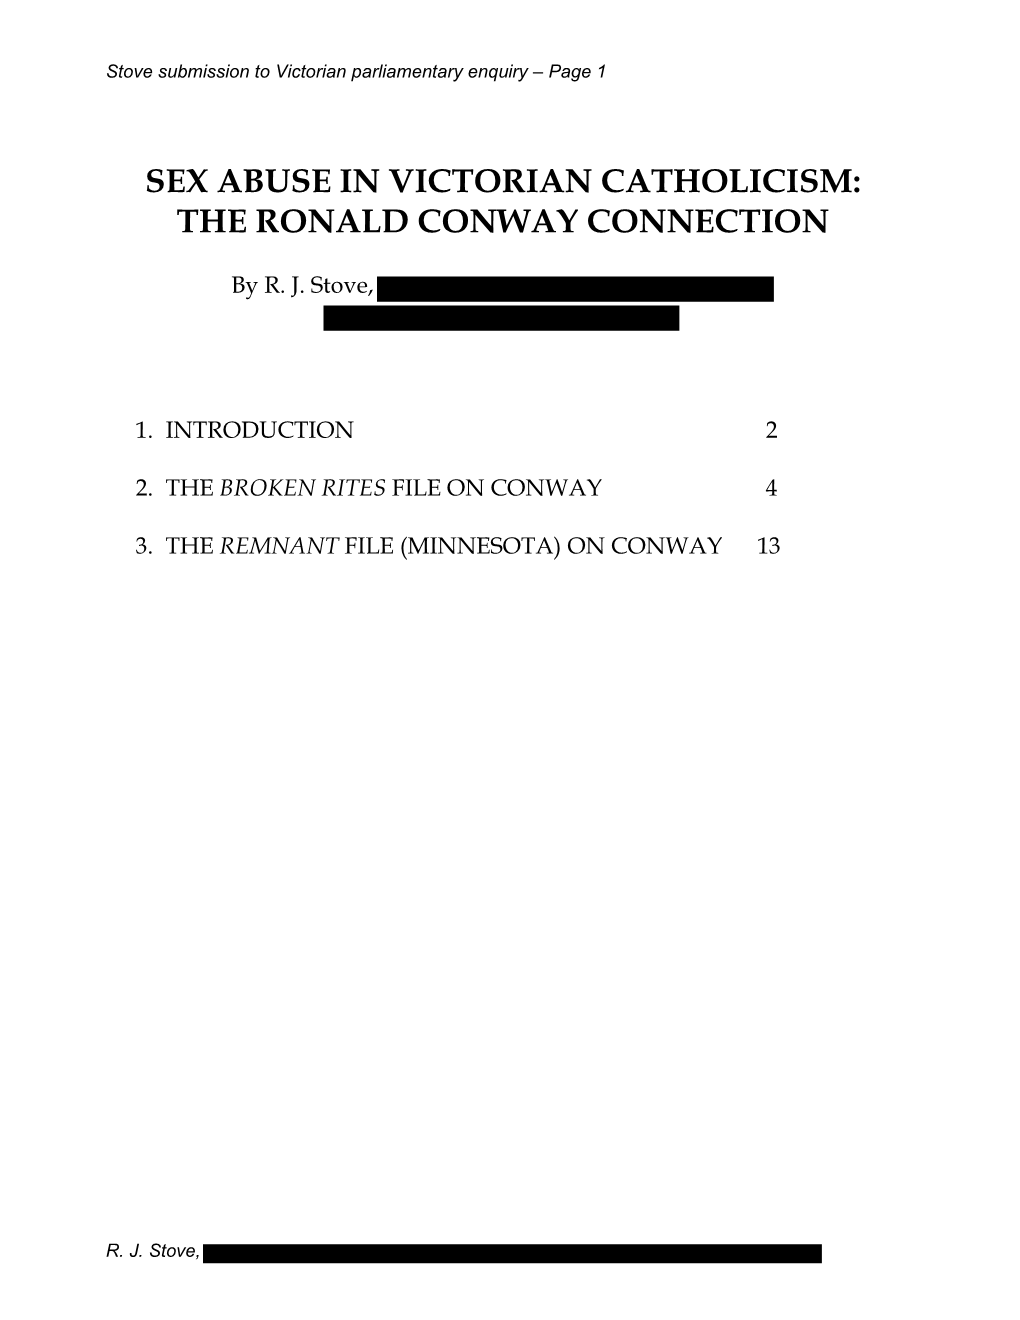 Sex Abuse in Victorian Catholicism: the Ronald Conway Connection